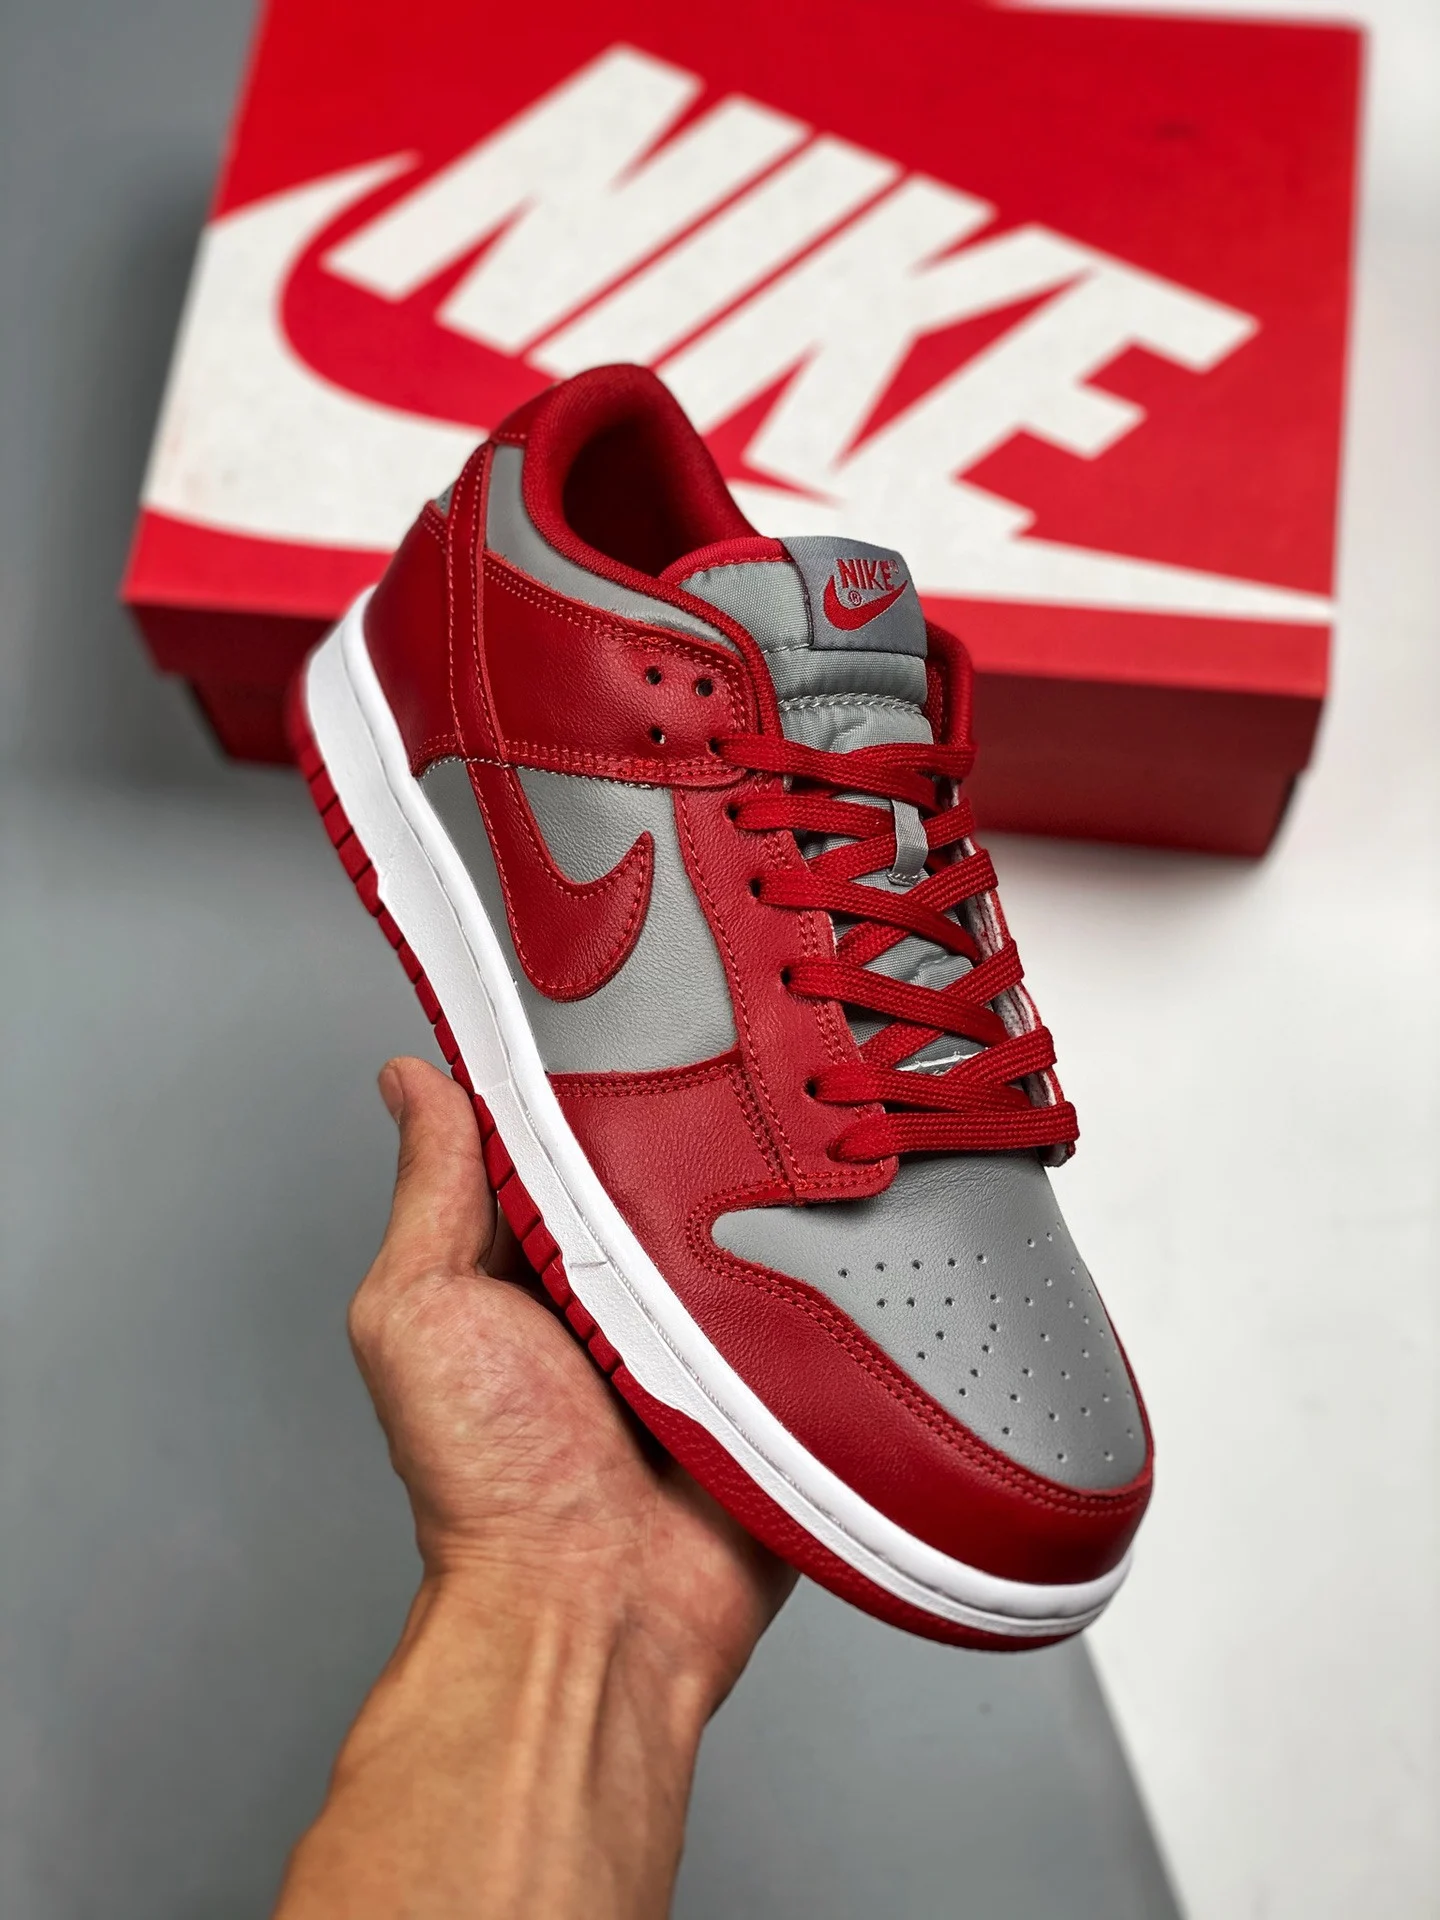 Nike Dunk Low UNLV Soft Grey University Red-White For Sale